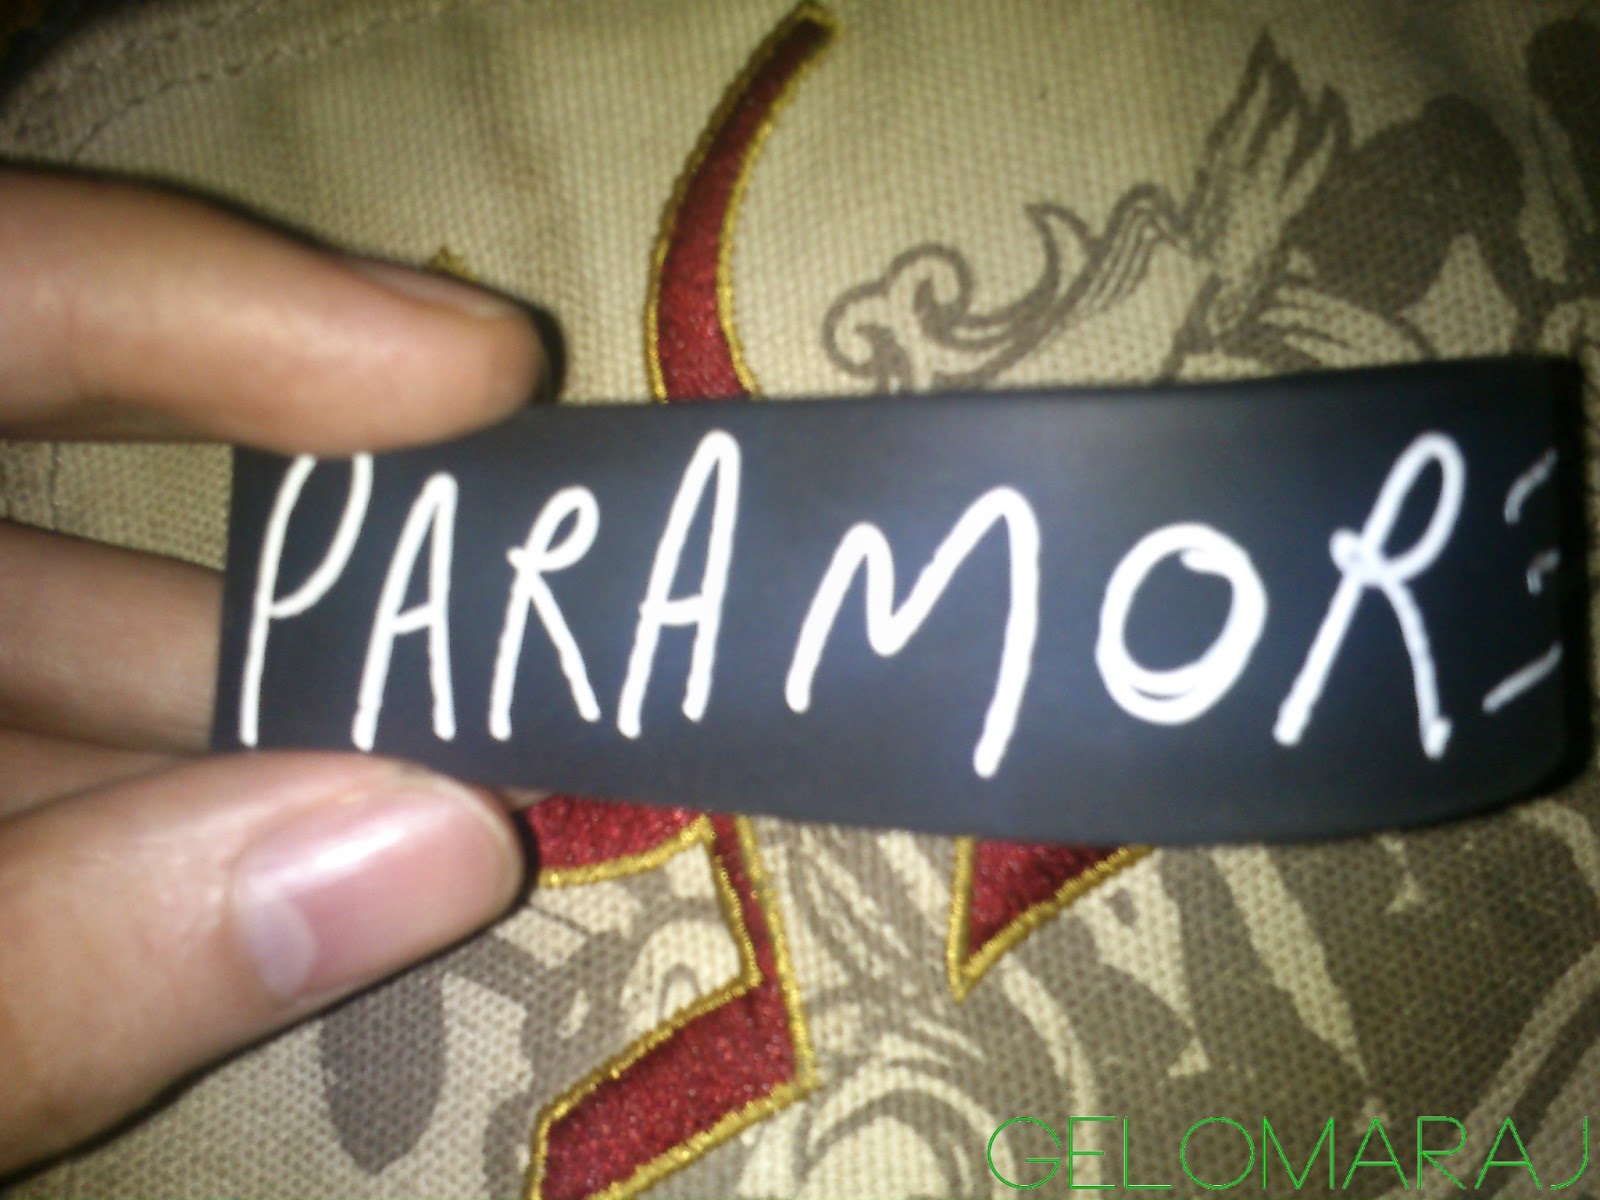 Filipino Fanboy: Parathrilla 2013: The Paramore Album Buyout & Paramore Self Titled ...